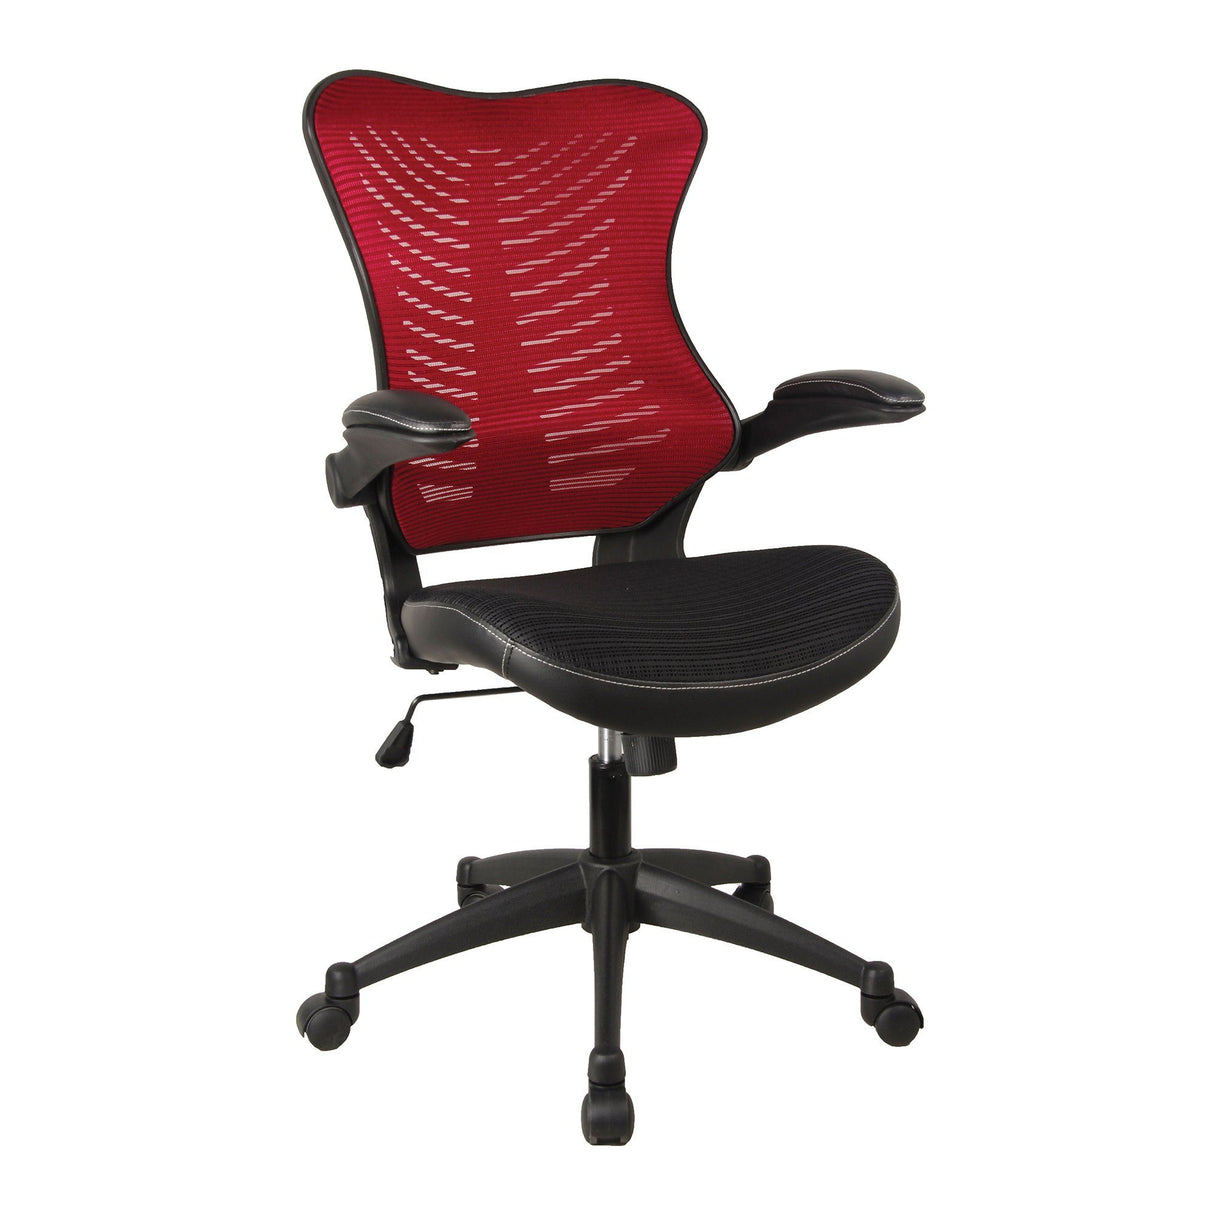 Nautilus Designs Mercury 2 Executive Medium Back Mesh Chair with AIRFLOW Fabric on the Seat - Red